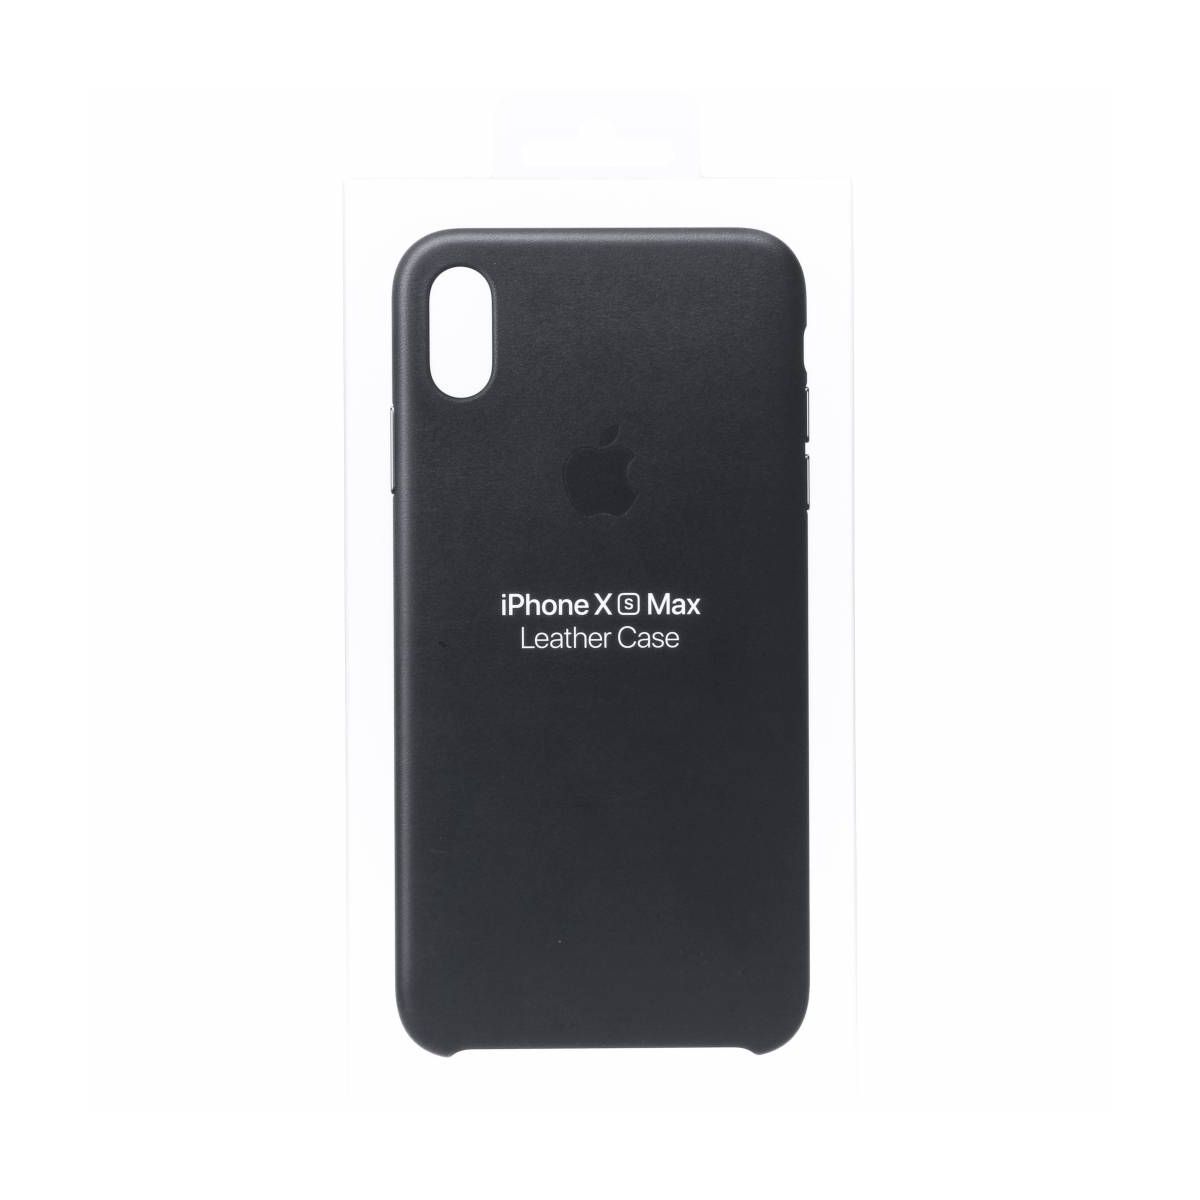 Apple Leather Backcover for iPhone Xs Max - Black